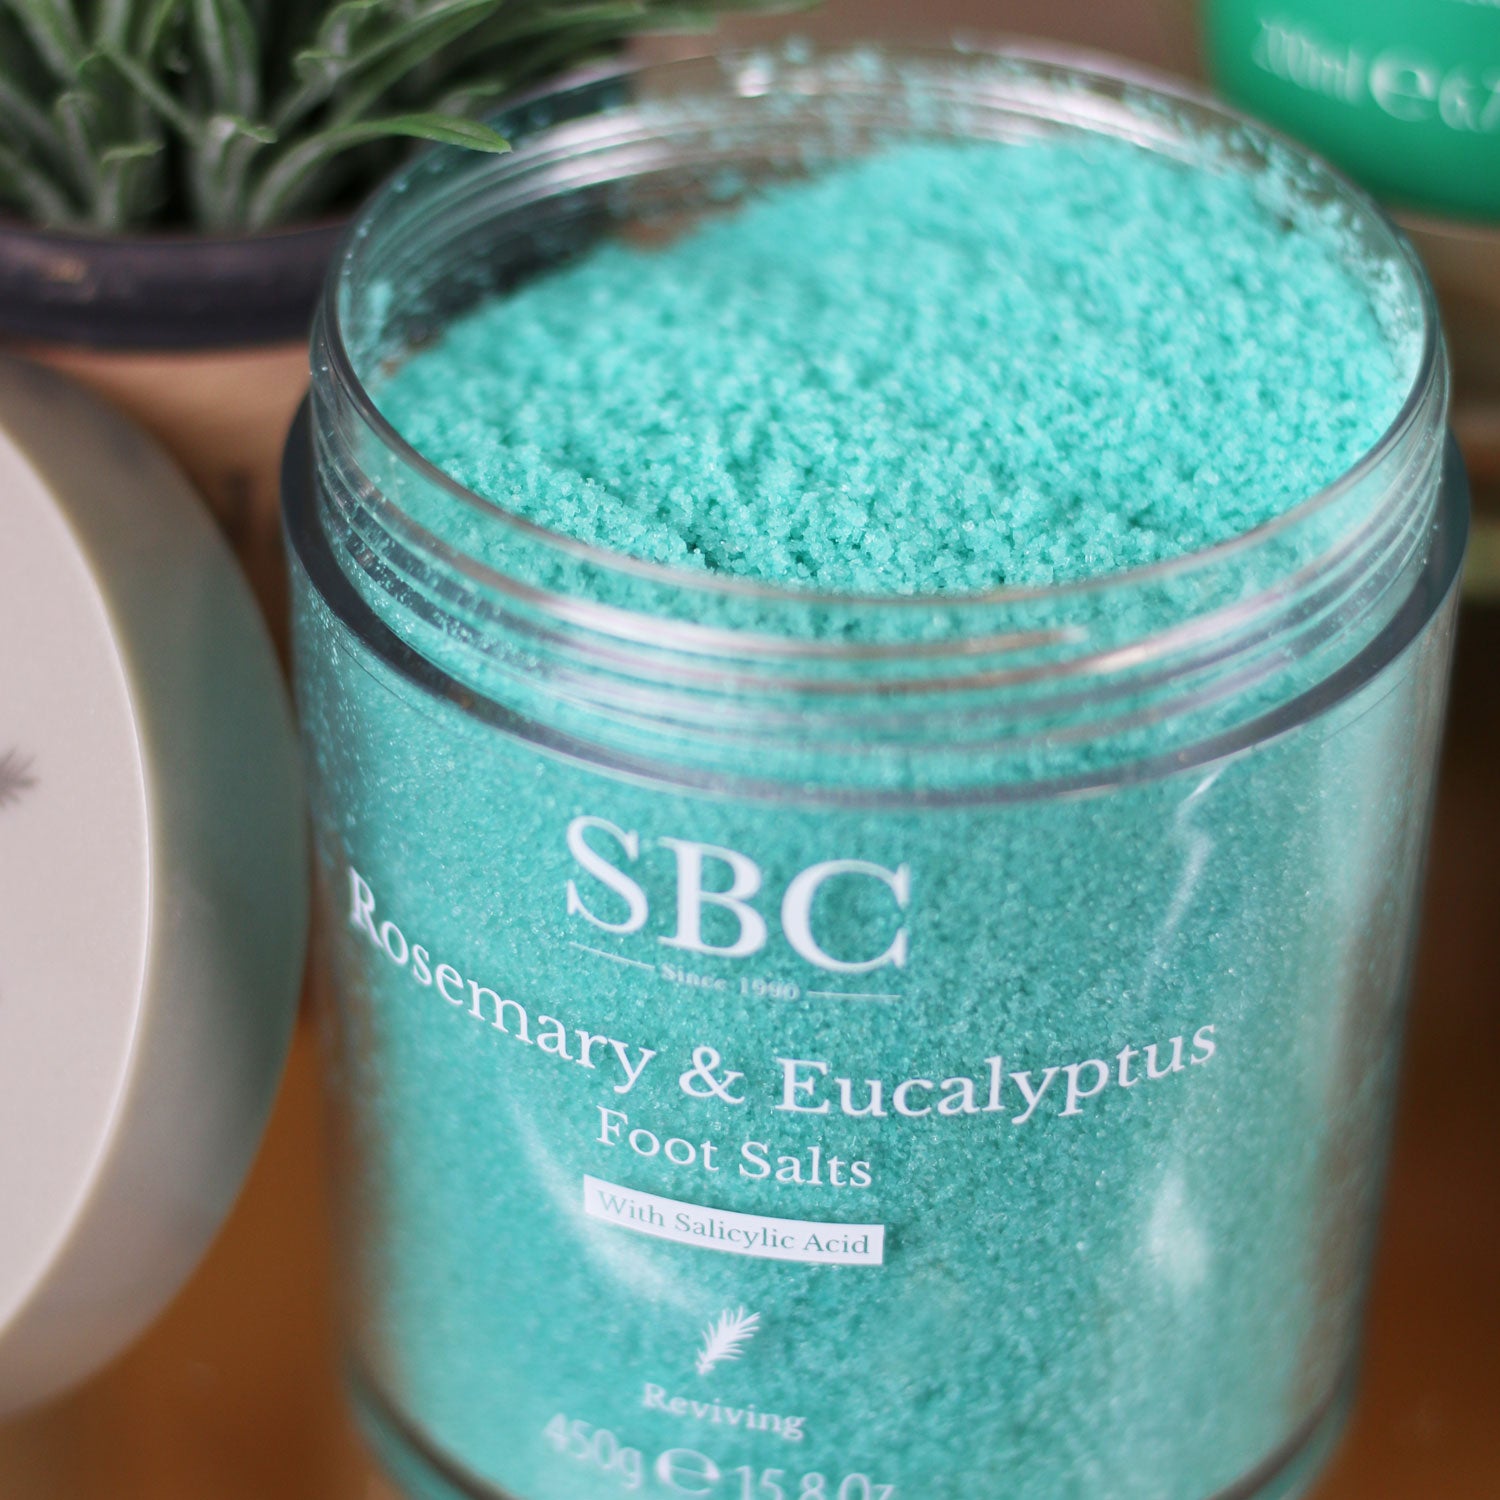 Rosemary & Eucalyptus Foot Salts with its lid off close up